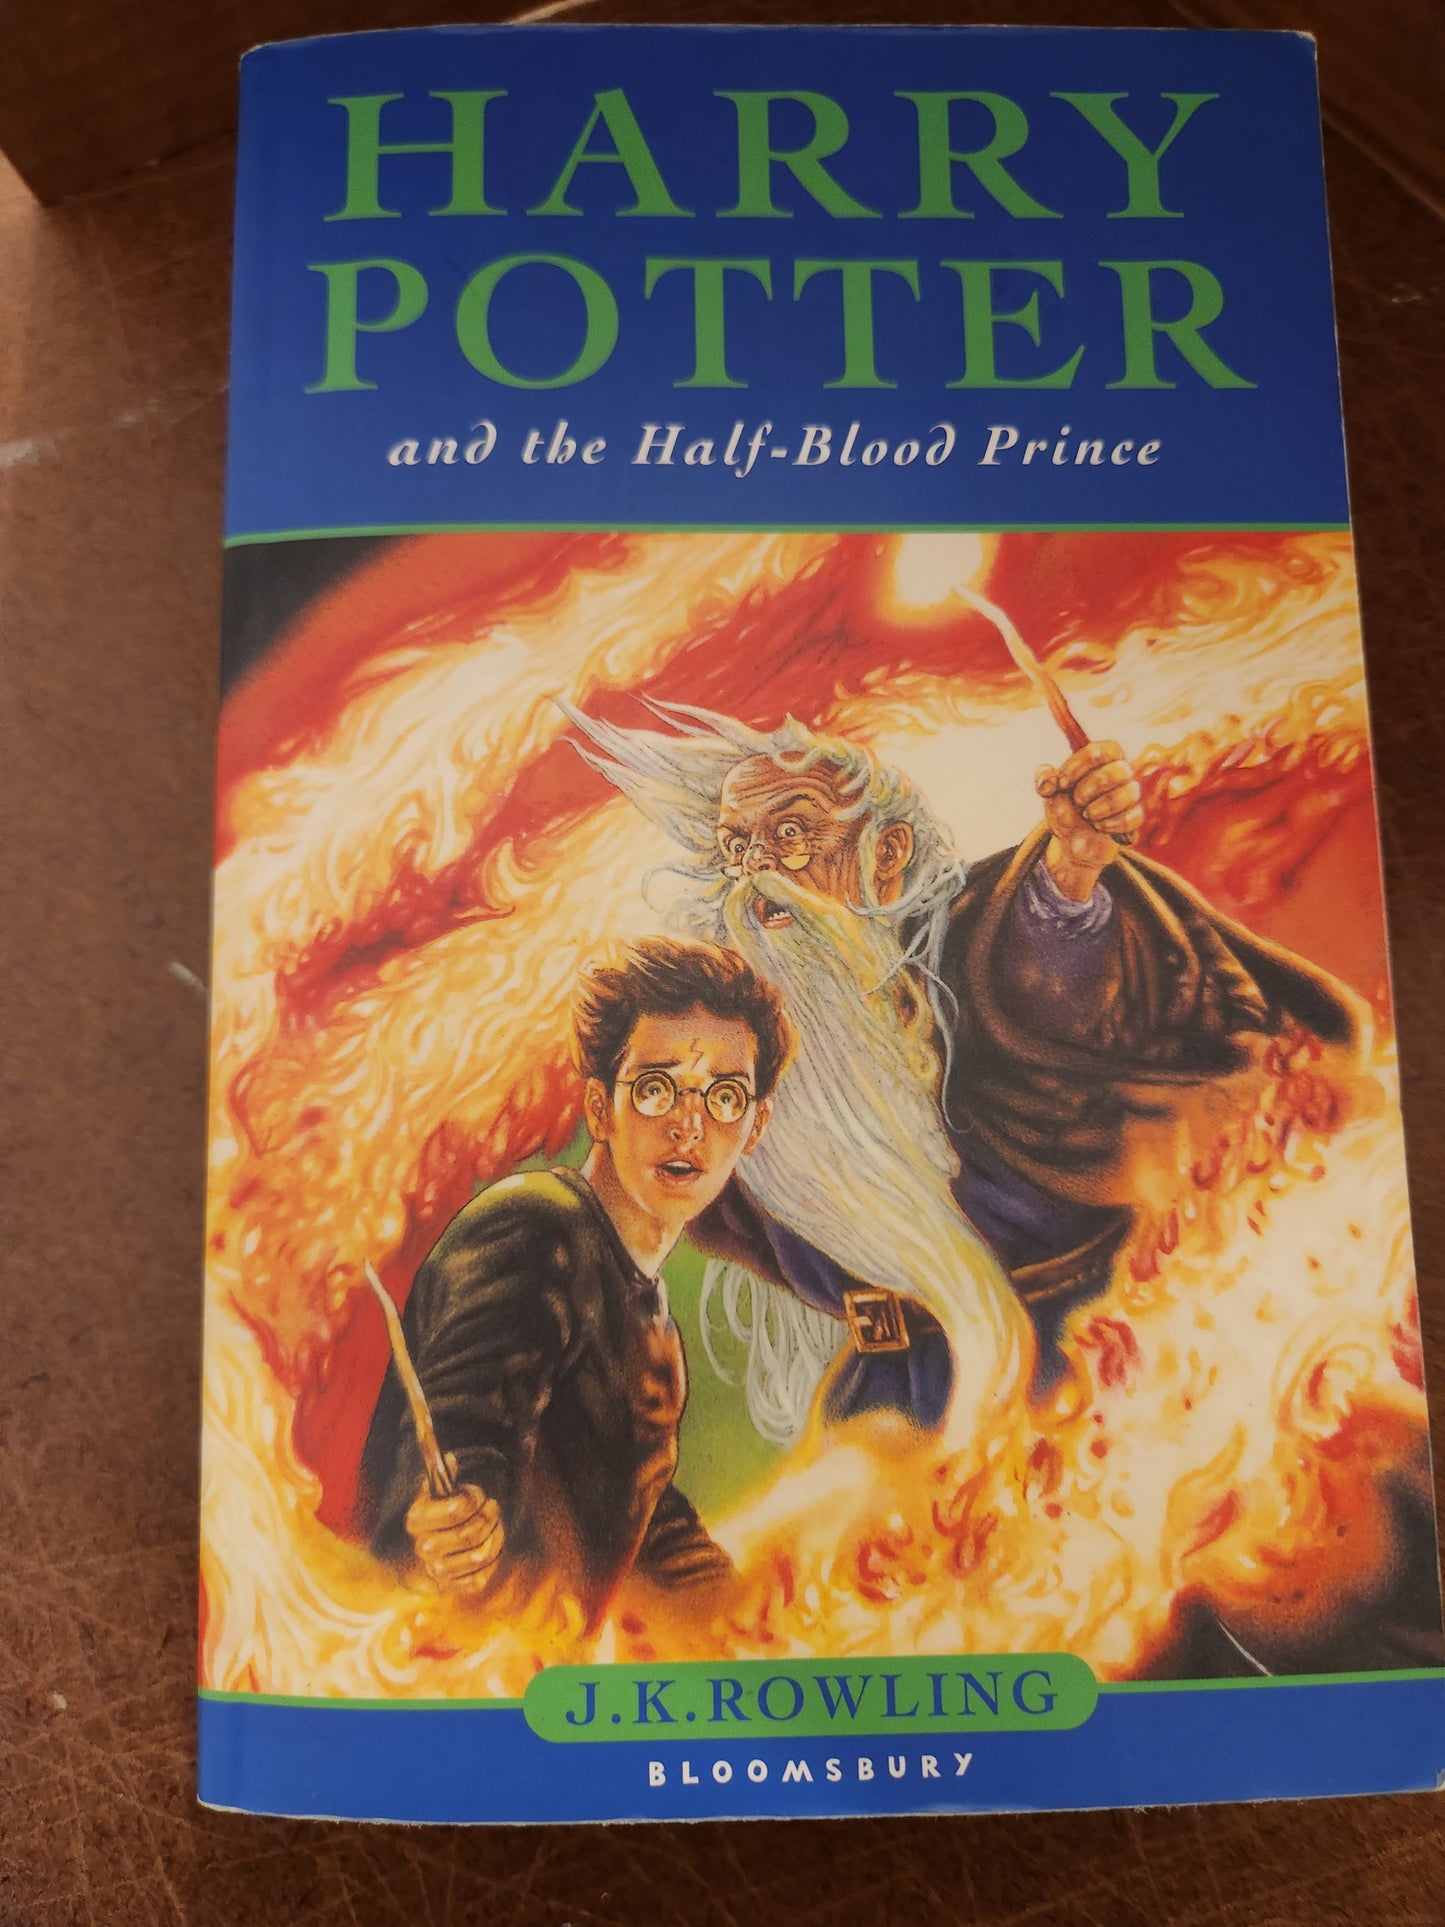 "Harry Potter and the Half-Blood Prince" by J. K. Rowling